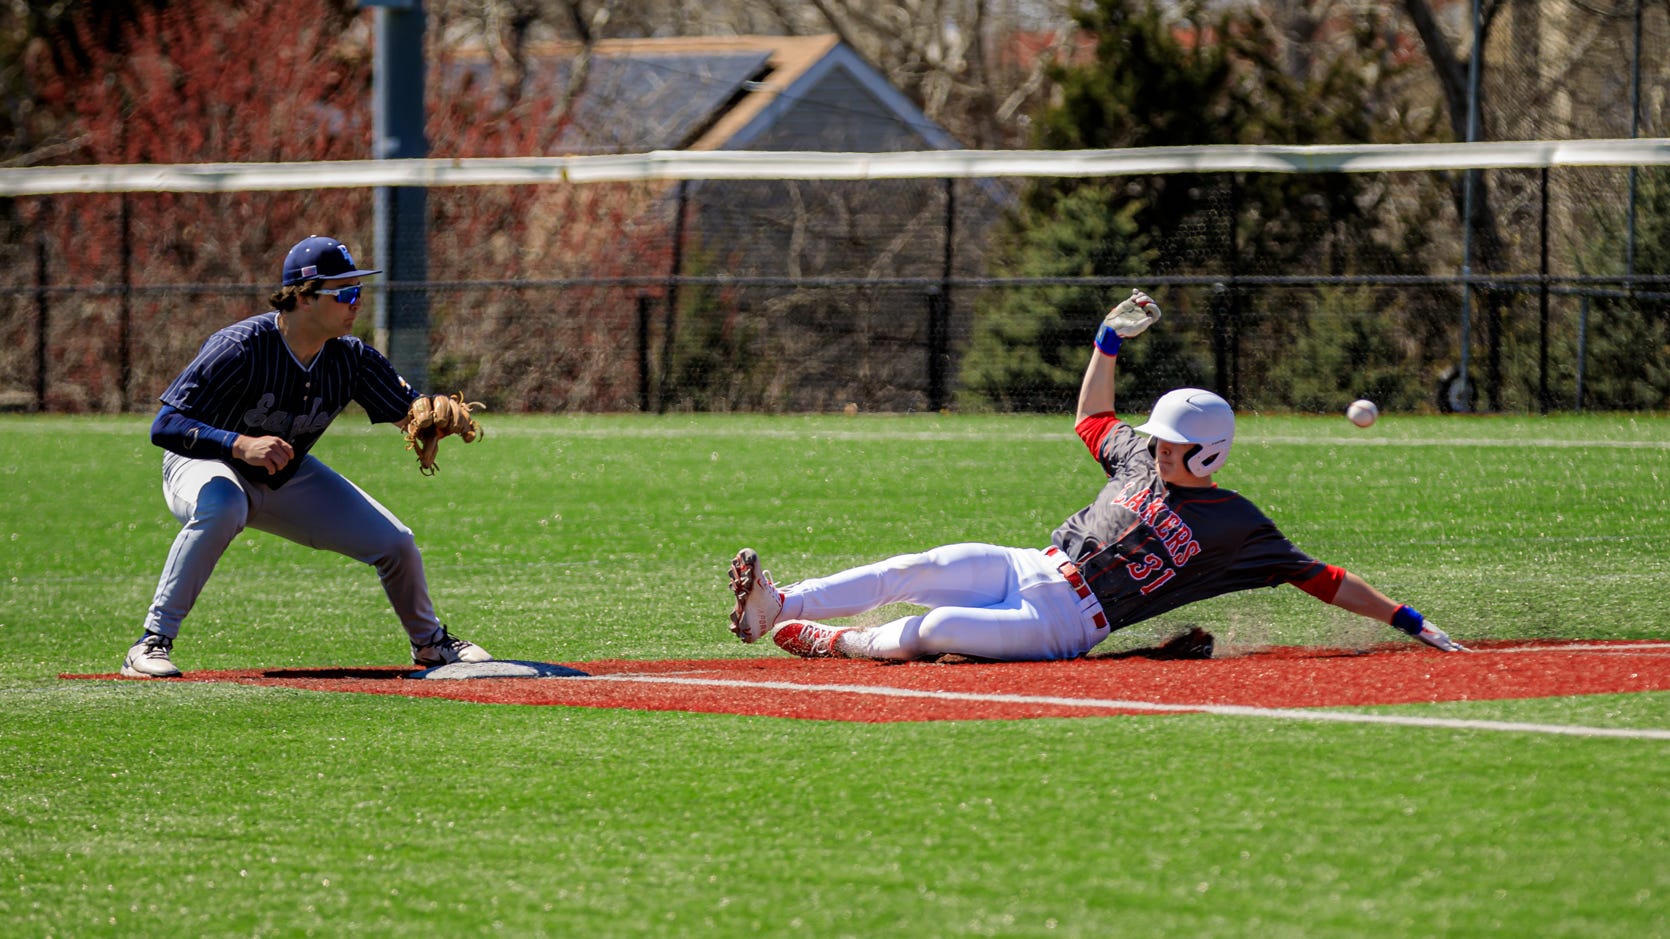 Anthony Miele slides into second base as Killian Murphy waits for the baseball to arrive.